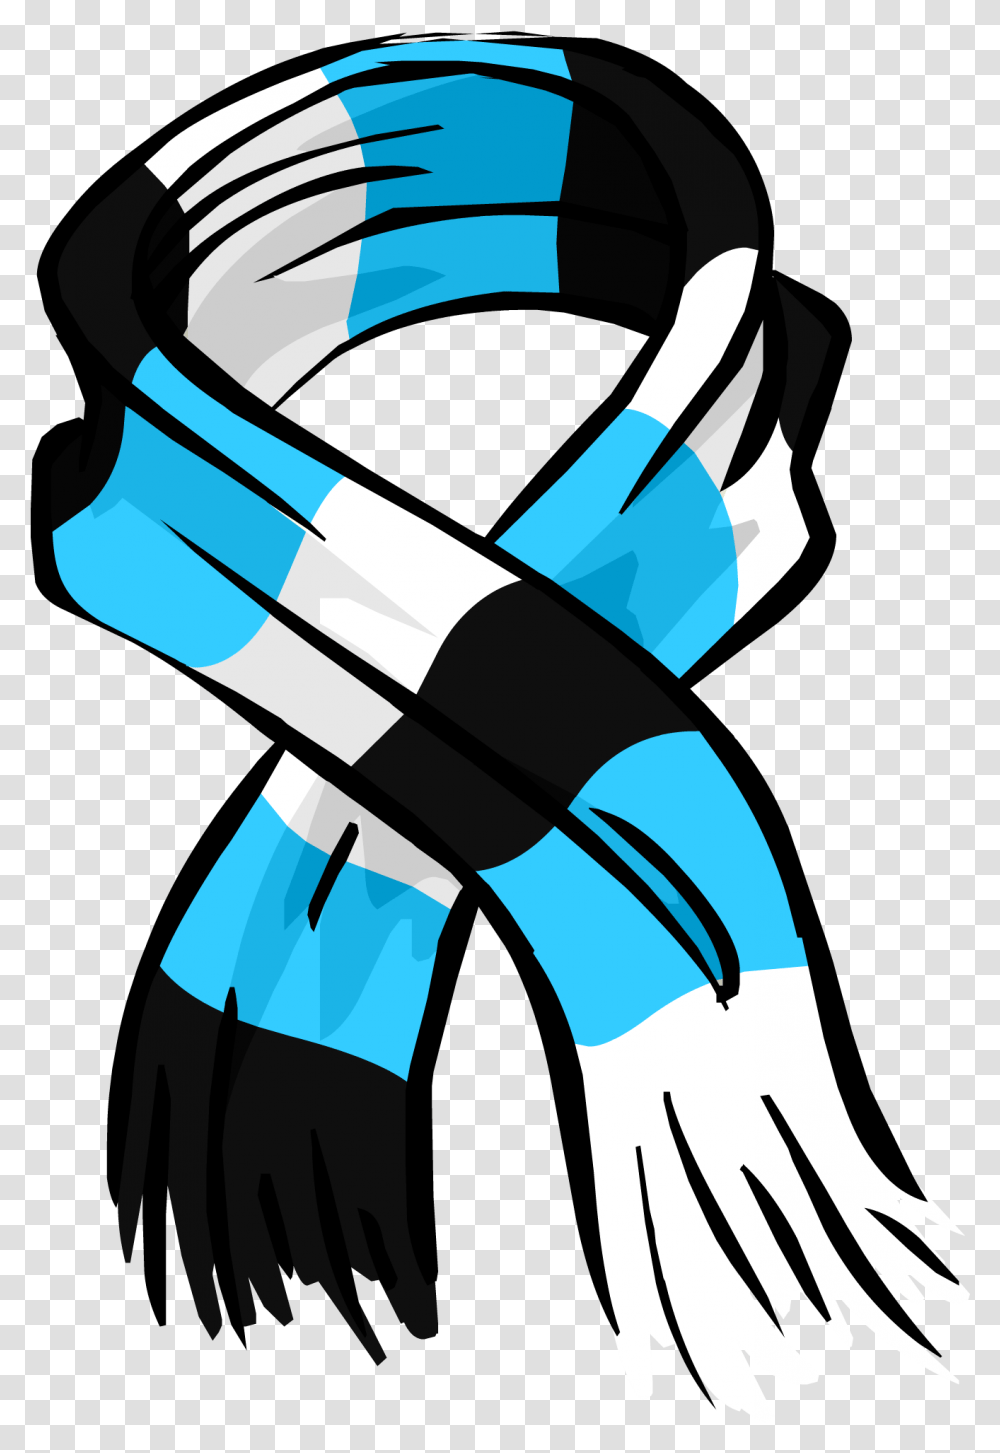 Download Blue Striped Scarf Image For Free Scarf Clipart, Clothing, Apparel, Graphics, Blue Jay Transparent Png